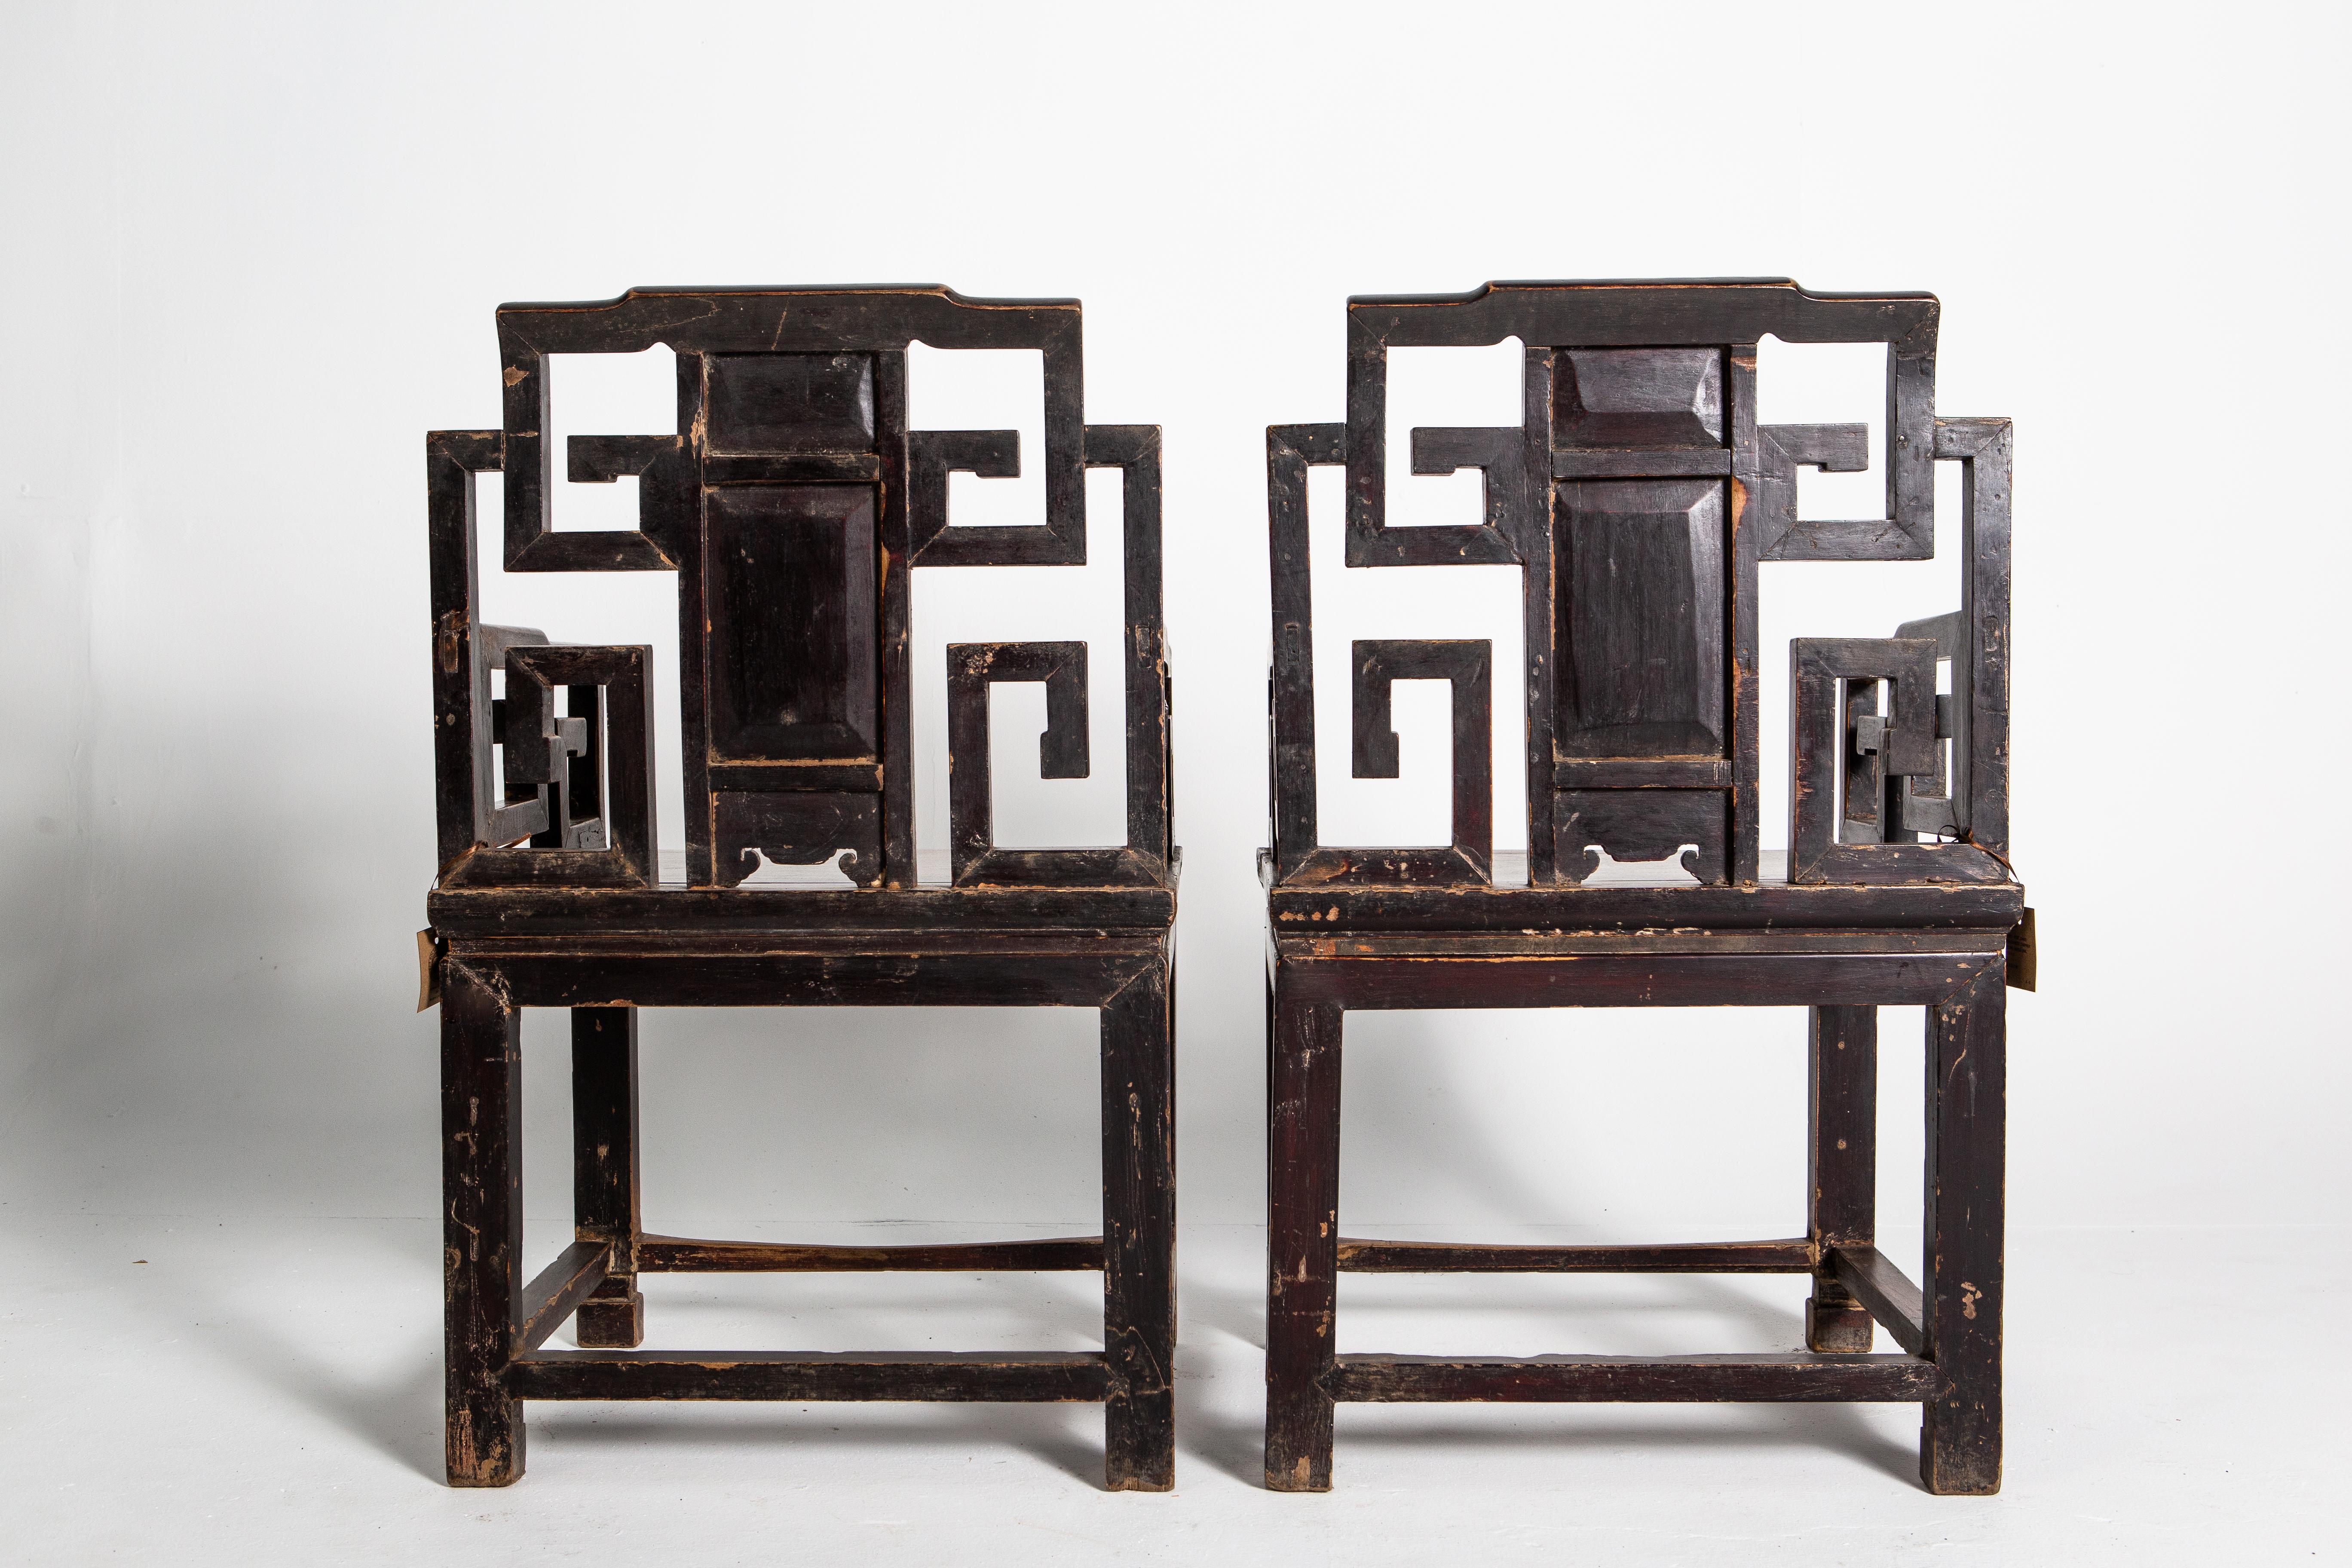 Carved from elm wood, these chairs feature an archaistic key motif and delicately carved stretchers in the form of pomegranate branches and fruit. These chairs are made in two parts: a simple high-waisted stool with scroll feet and a more decorative